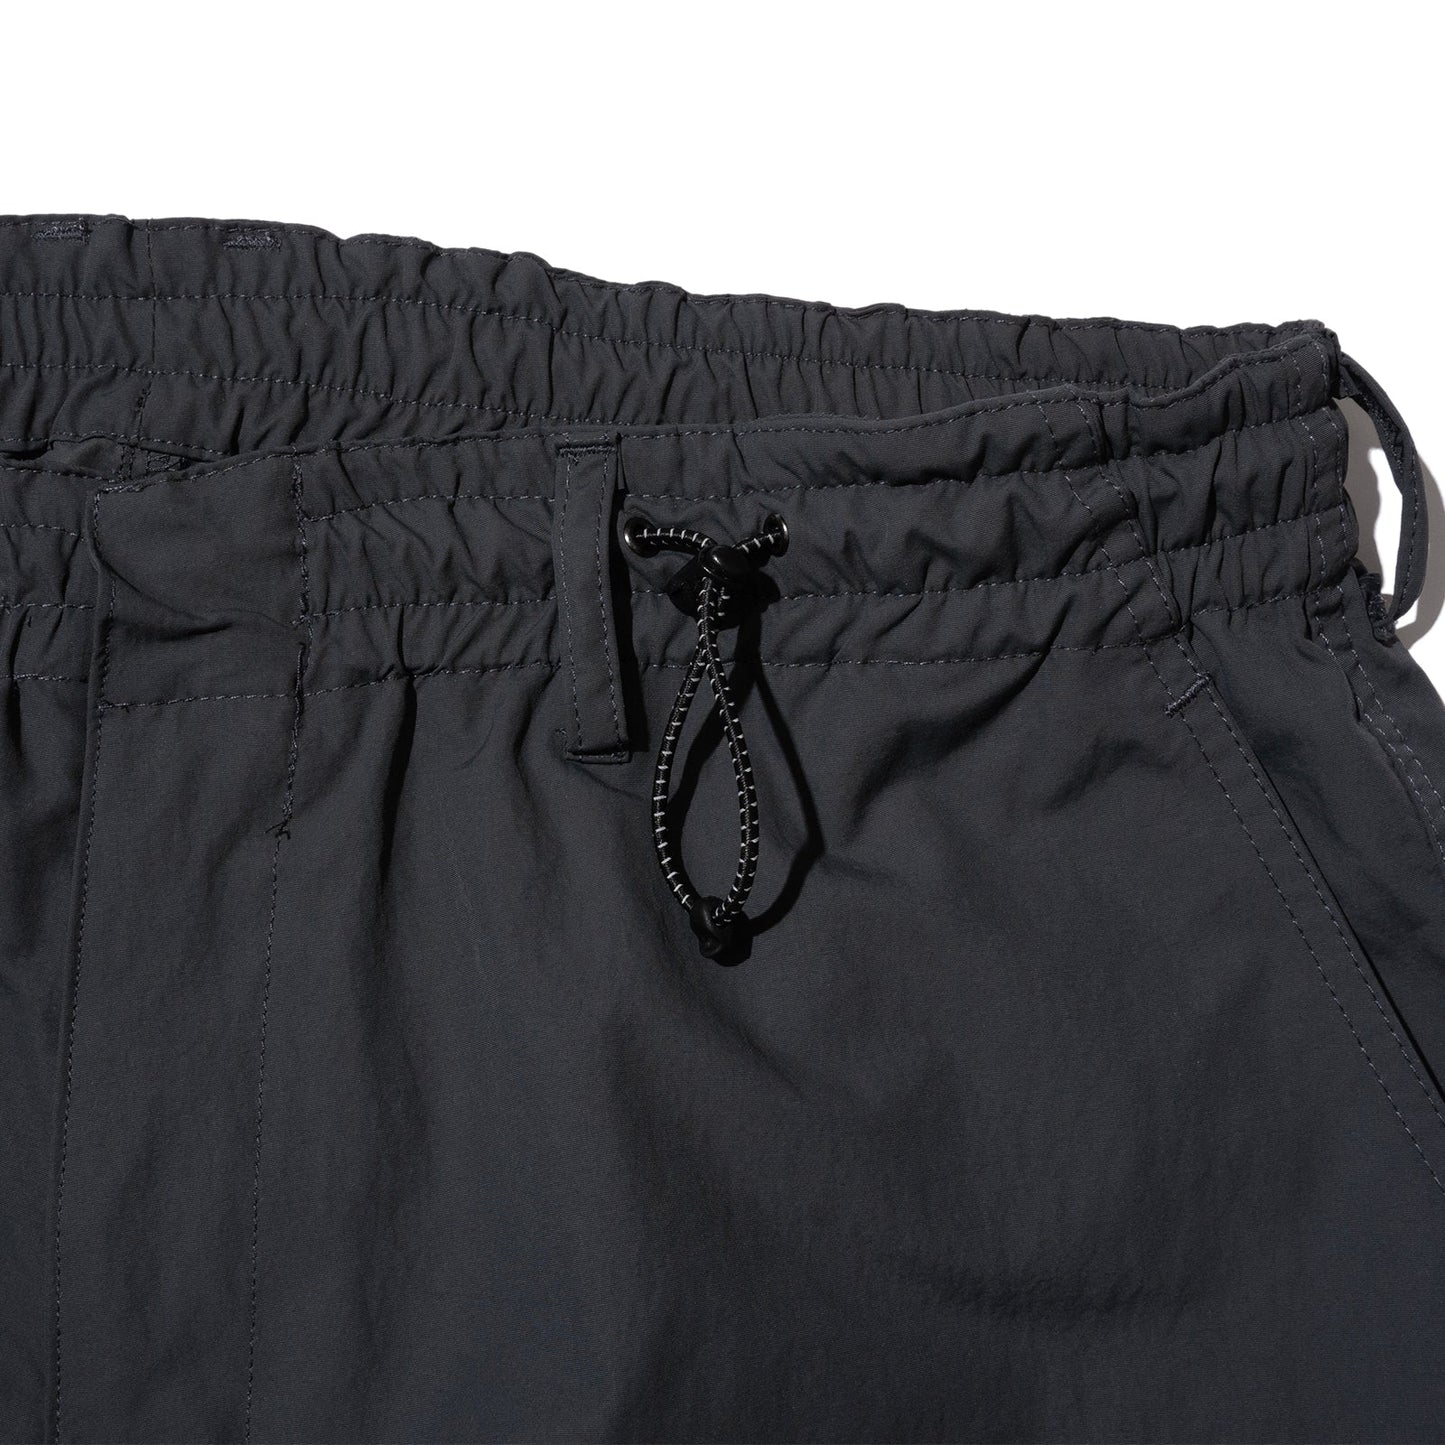 DeMarcoLab - Eezee Mil Trouser #2 - Charcoal